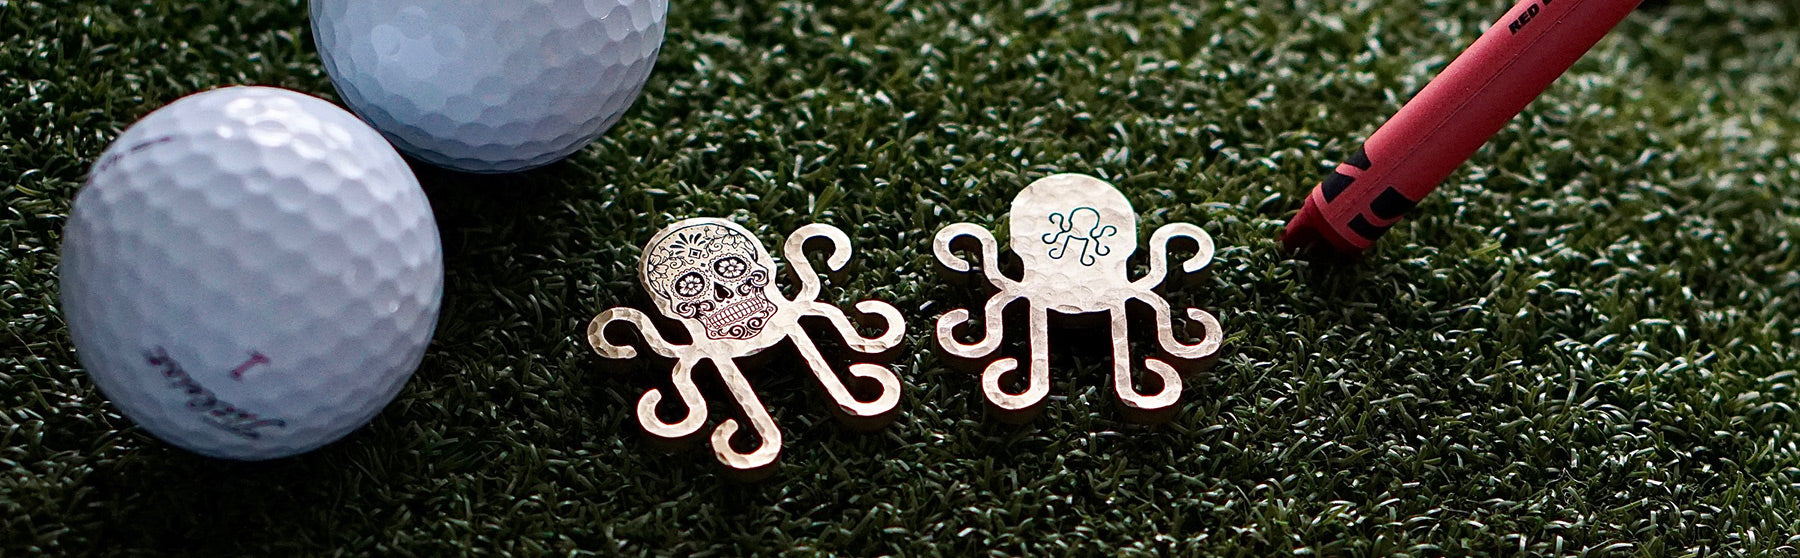 introducing the newest member of the Kraken Logo Shaped Golf Ball Markers